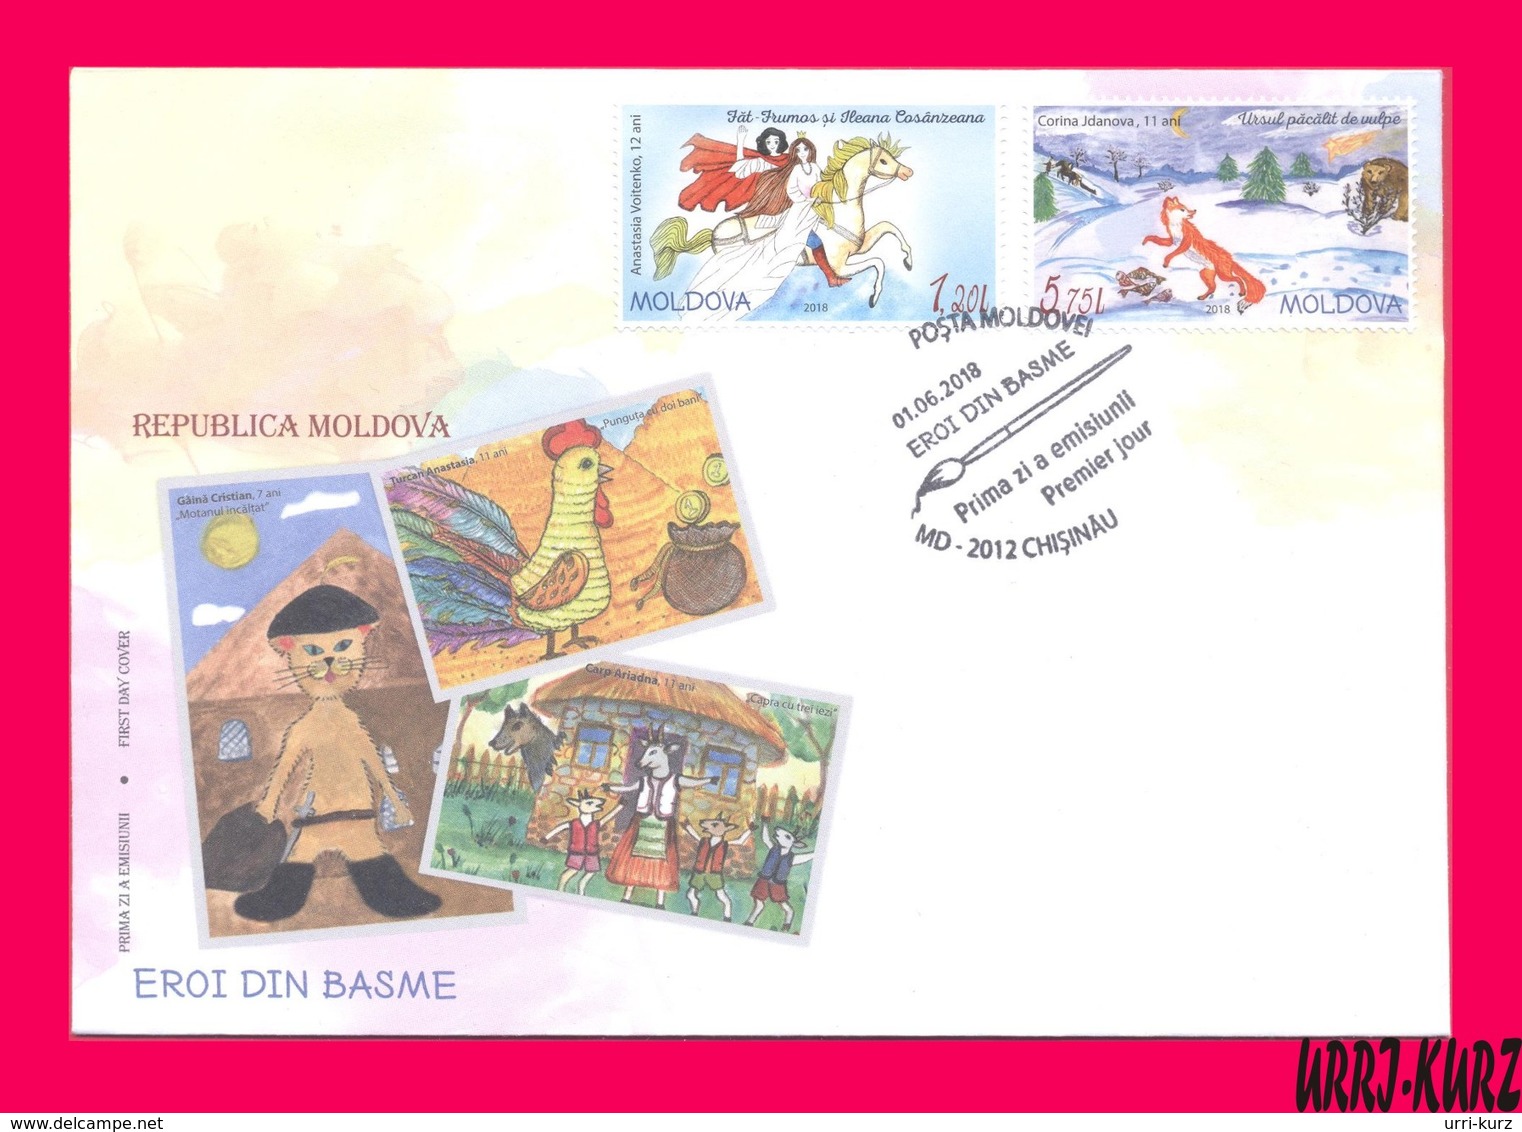 MOLDOVA 2018 Art Paintings Fairy Tales In Children Drawings Childrens Day Mi1051-1052 Sc987-988 FDC - Fairy Tales, Popular Stories & Legends